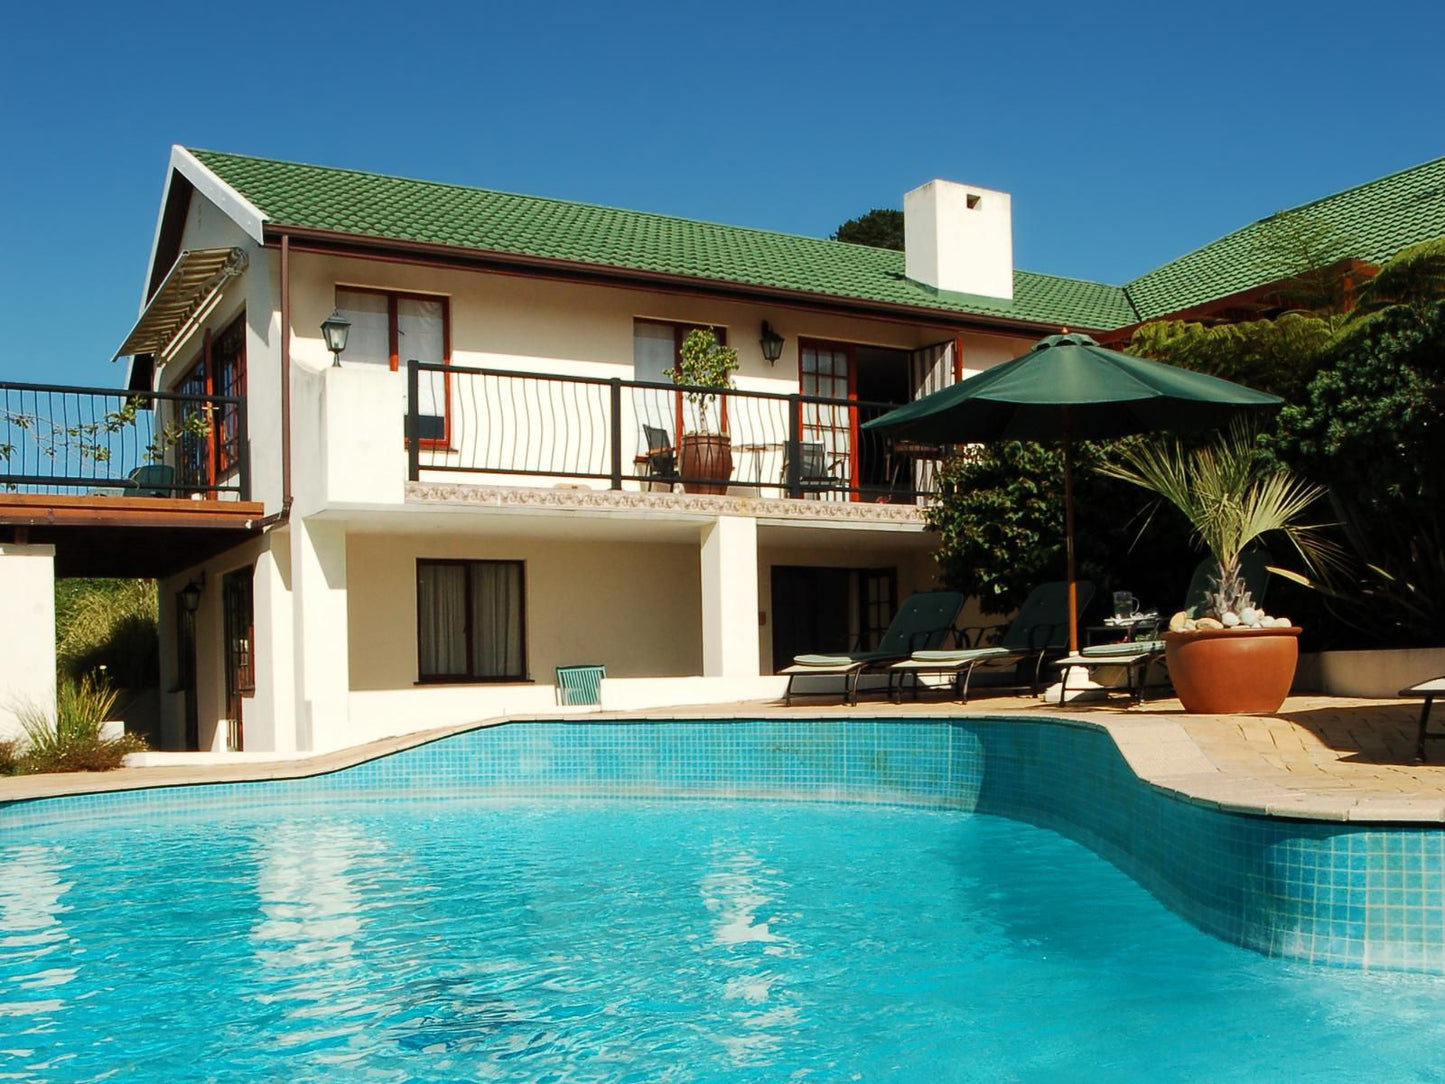 Knysna Country House Hunters Home Knysna Western Cape South Africa House, Building, Architecture, Swimming Pool